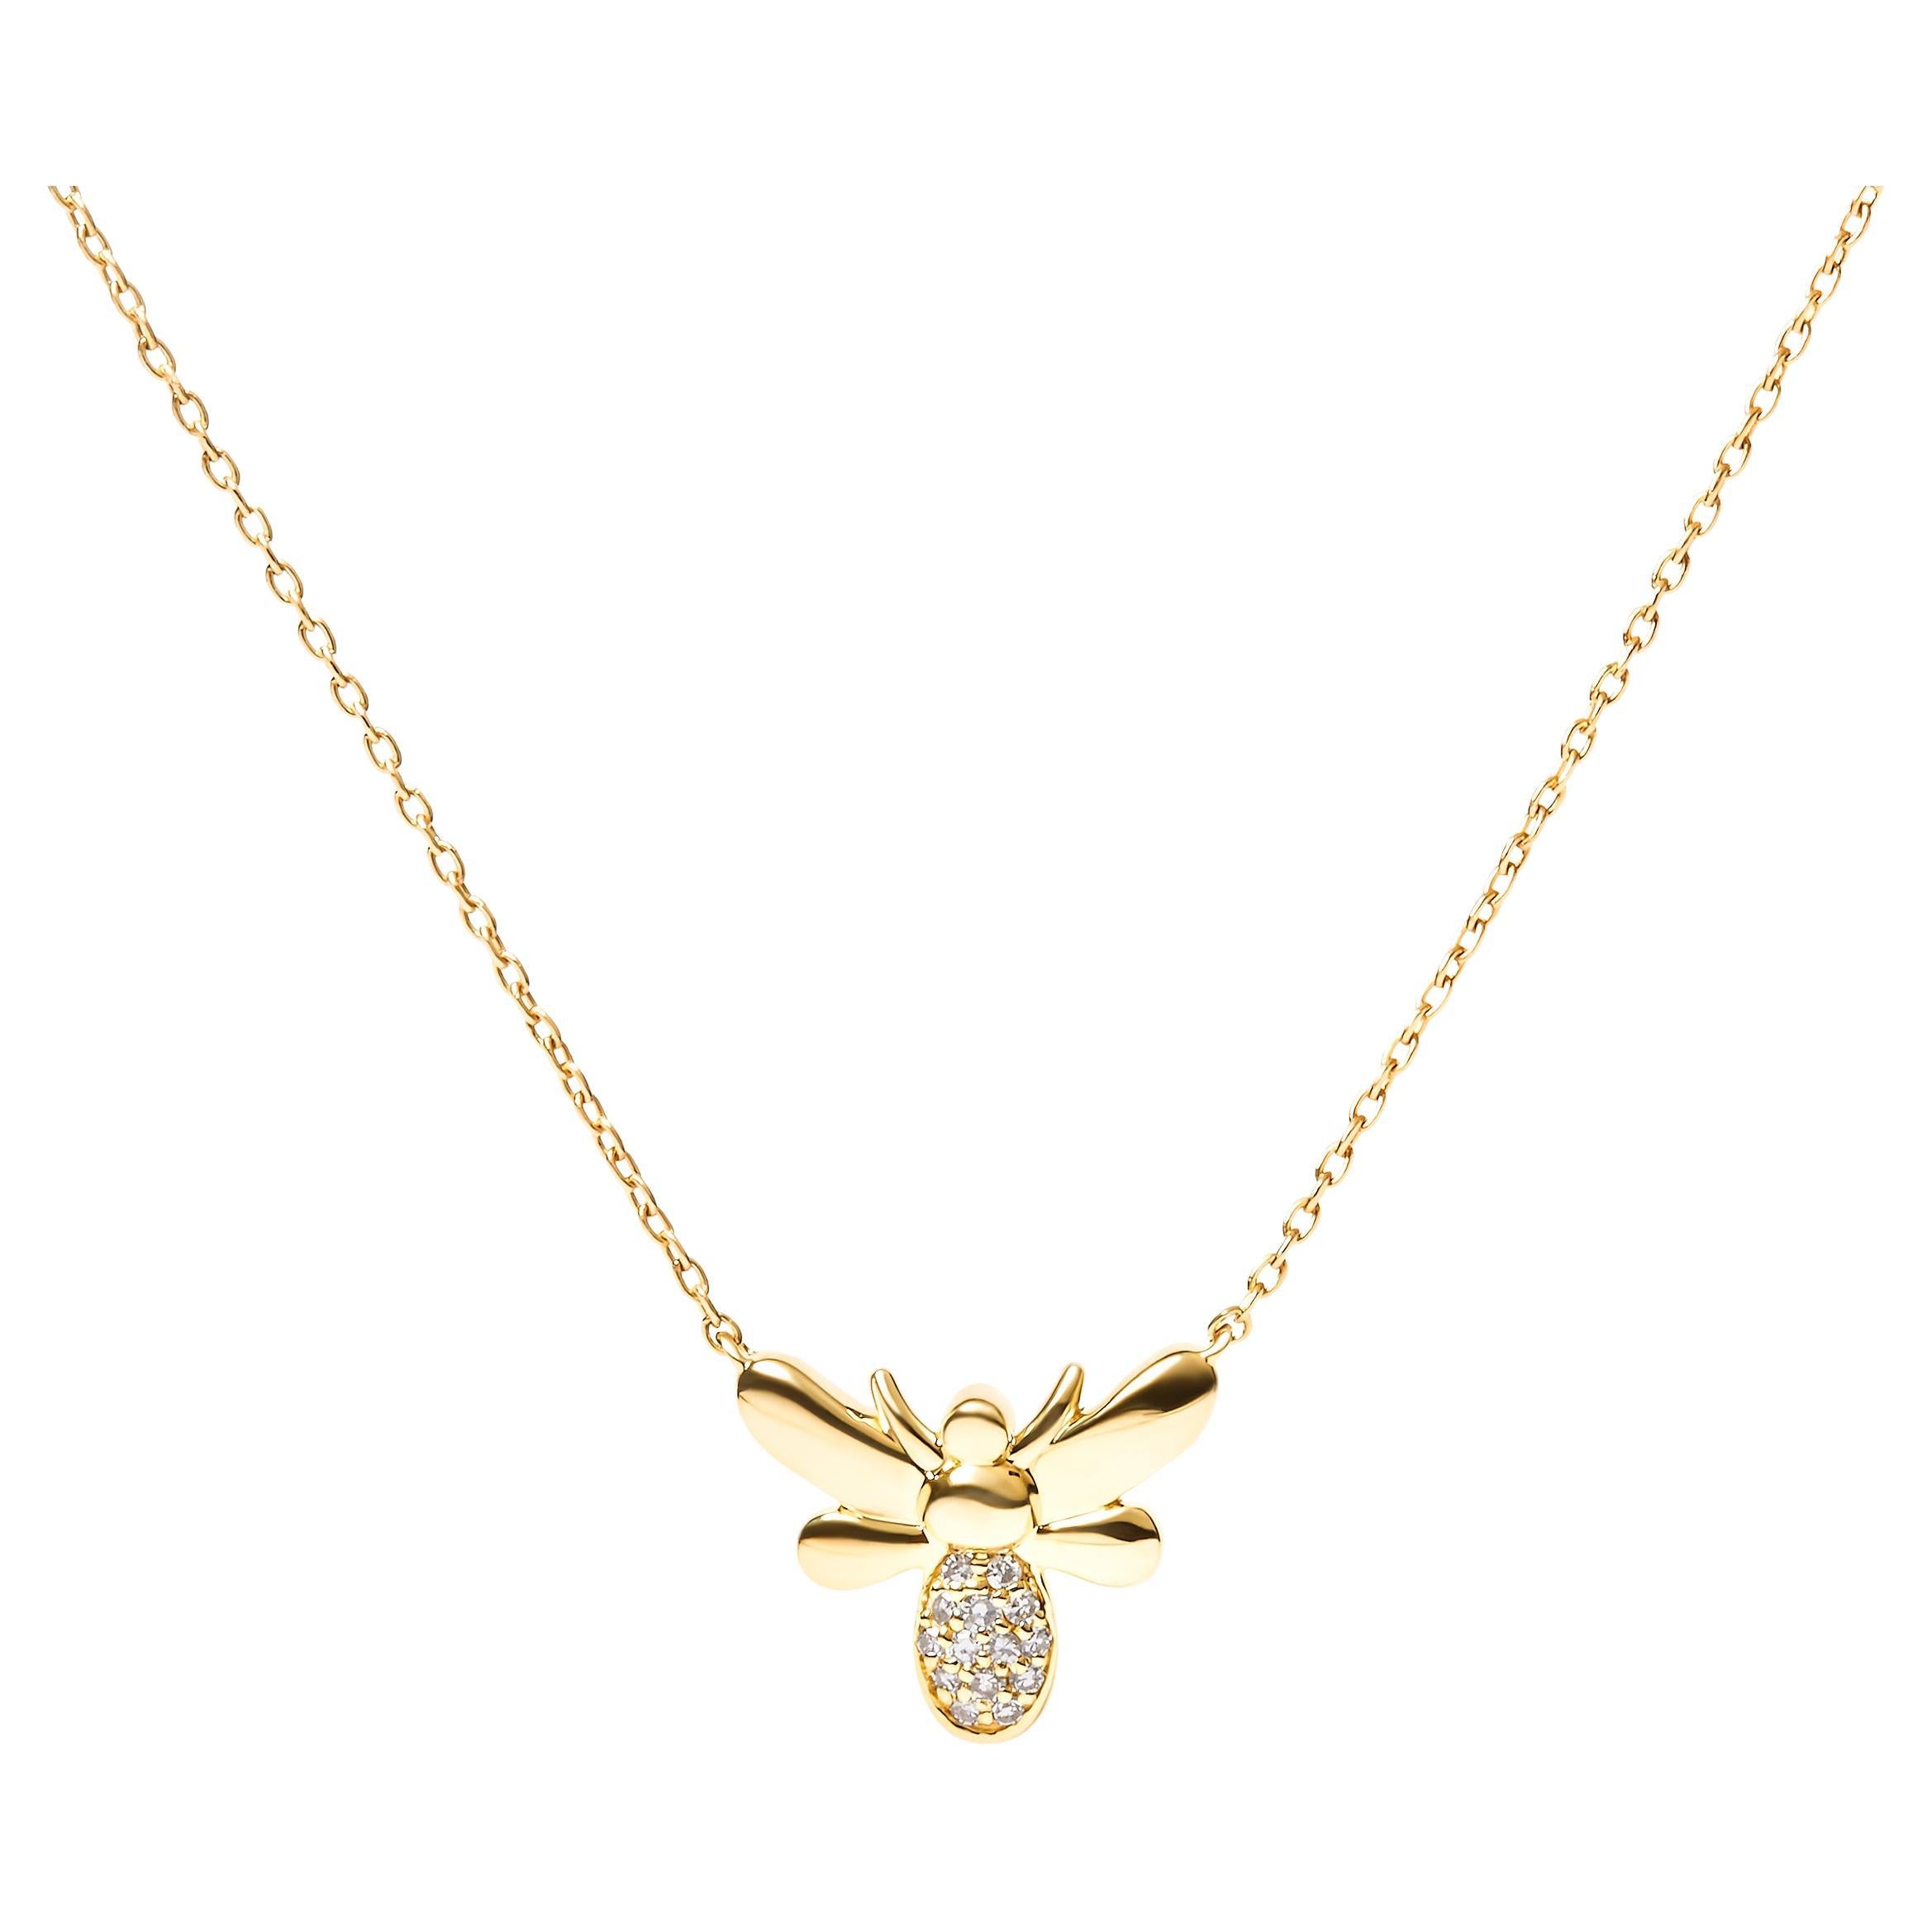 10K Yellow Gold Diamond Accented Bumble Bee Pendant Necklace